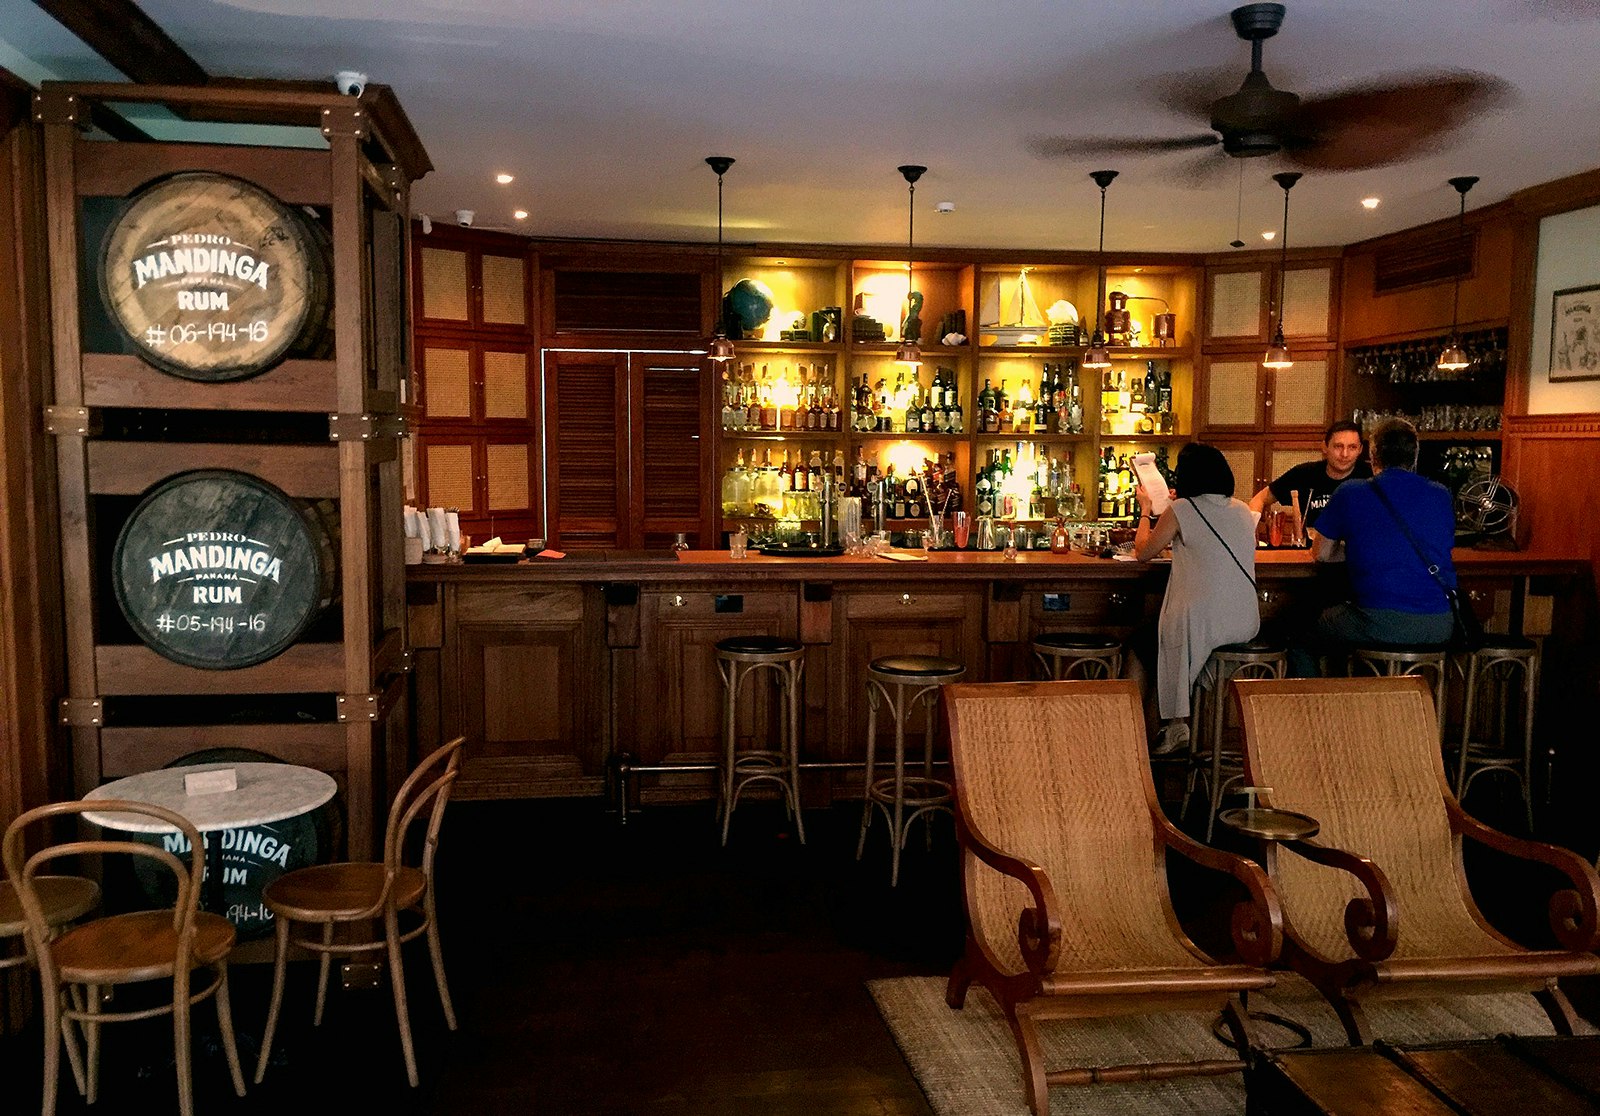 A man and a woman sit at at wooden bar in front of a bartender. The woman is holding a menu. To the left is a shelf filled with large wooden barrels. In front of the shelves is a small table with a pair of chairs. There are two rattan campaign chairs in the middle of the bar. 